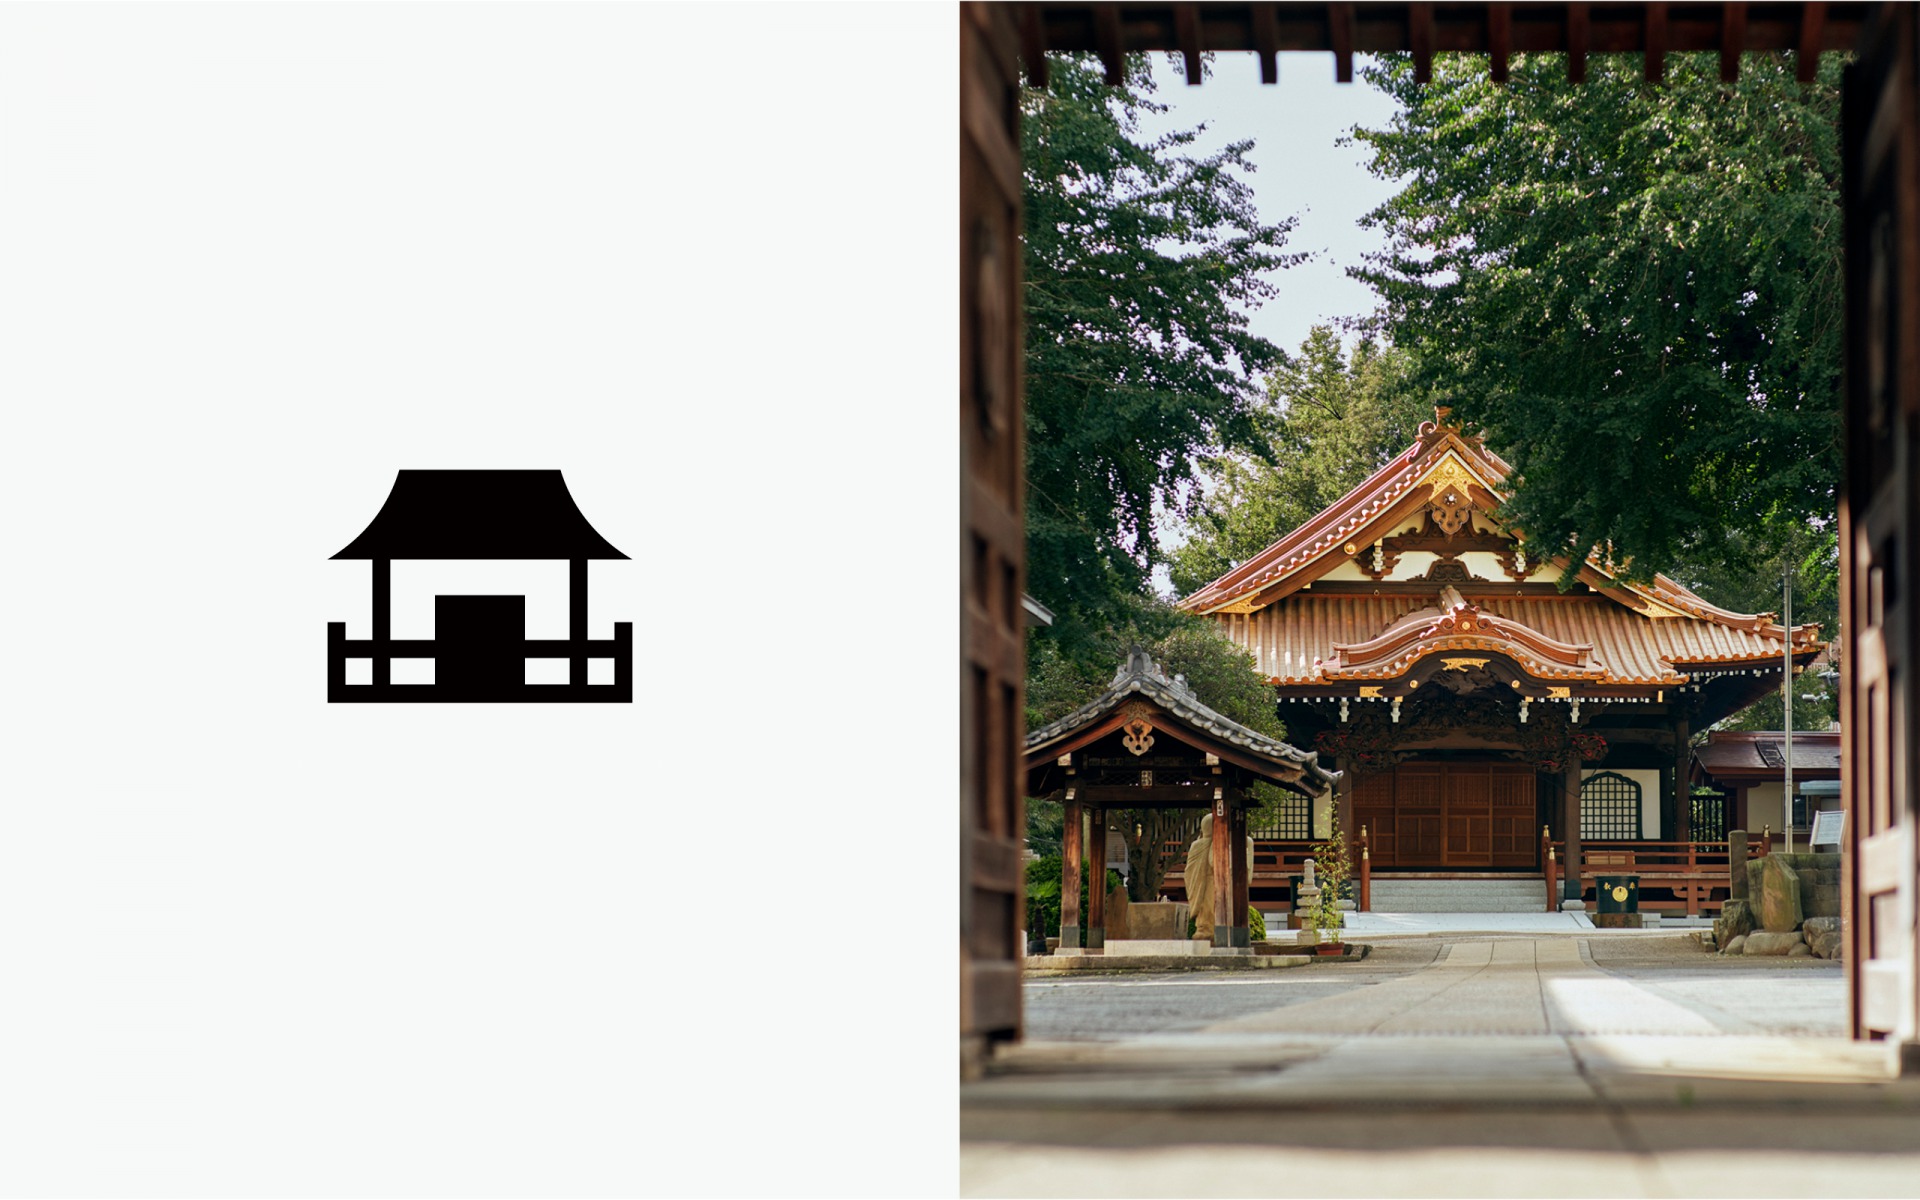 Experience Japan Pictograms